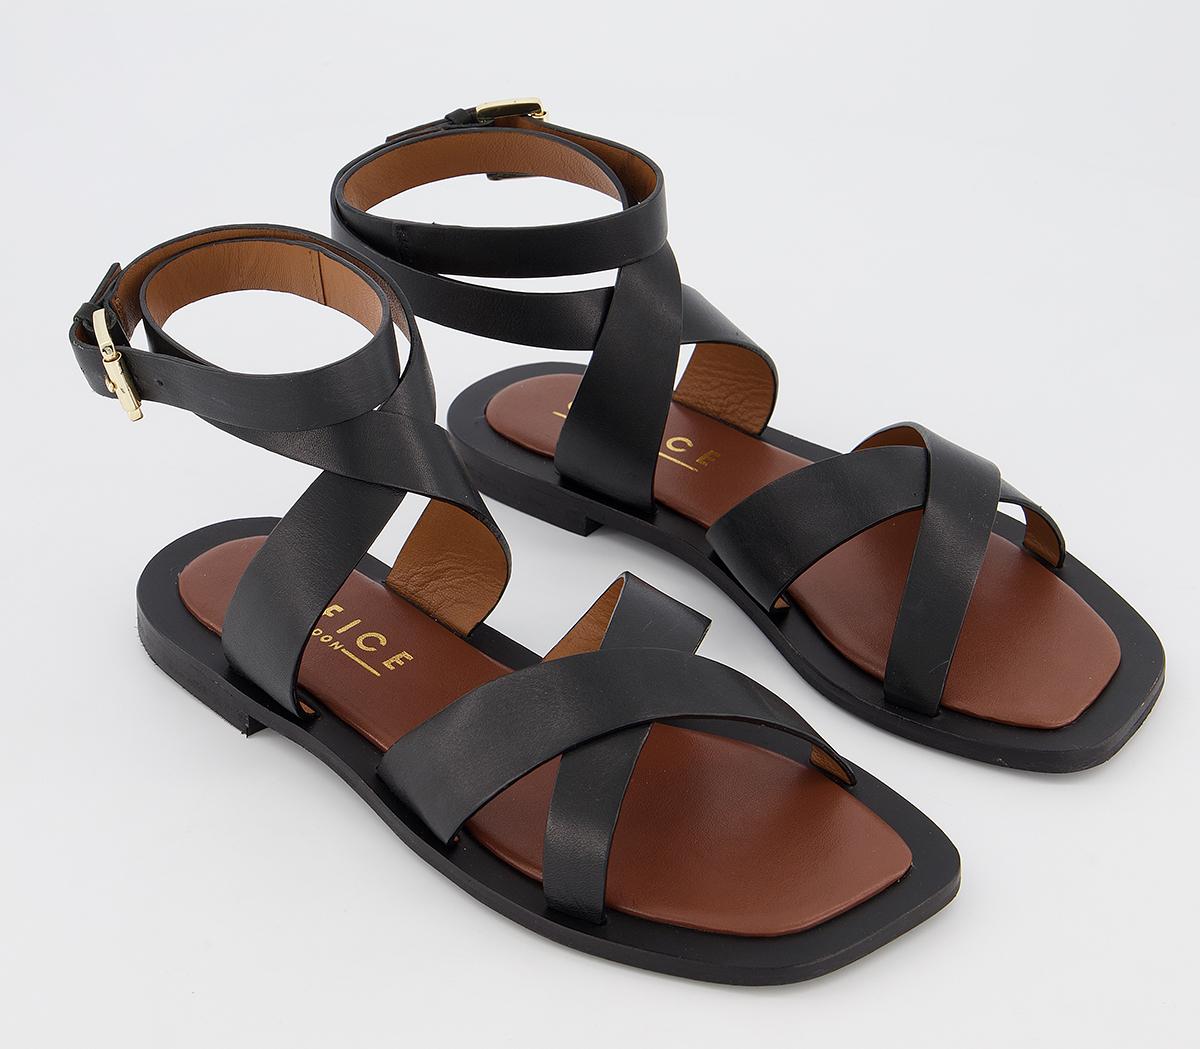 Office Siren Crossover Square Toe Sandals Black Leather - Women’s Sandals